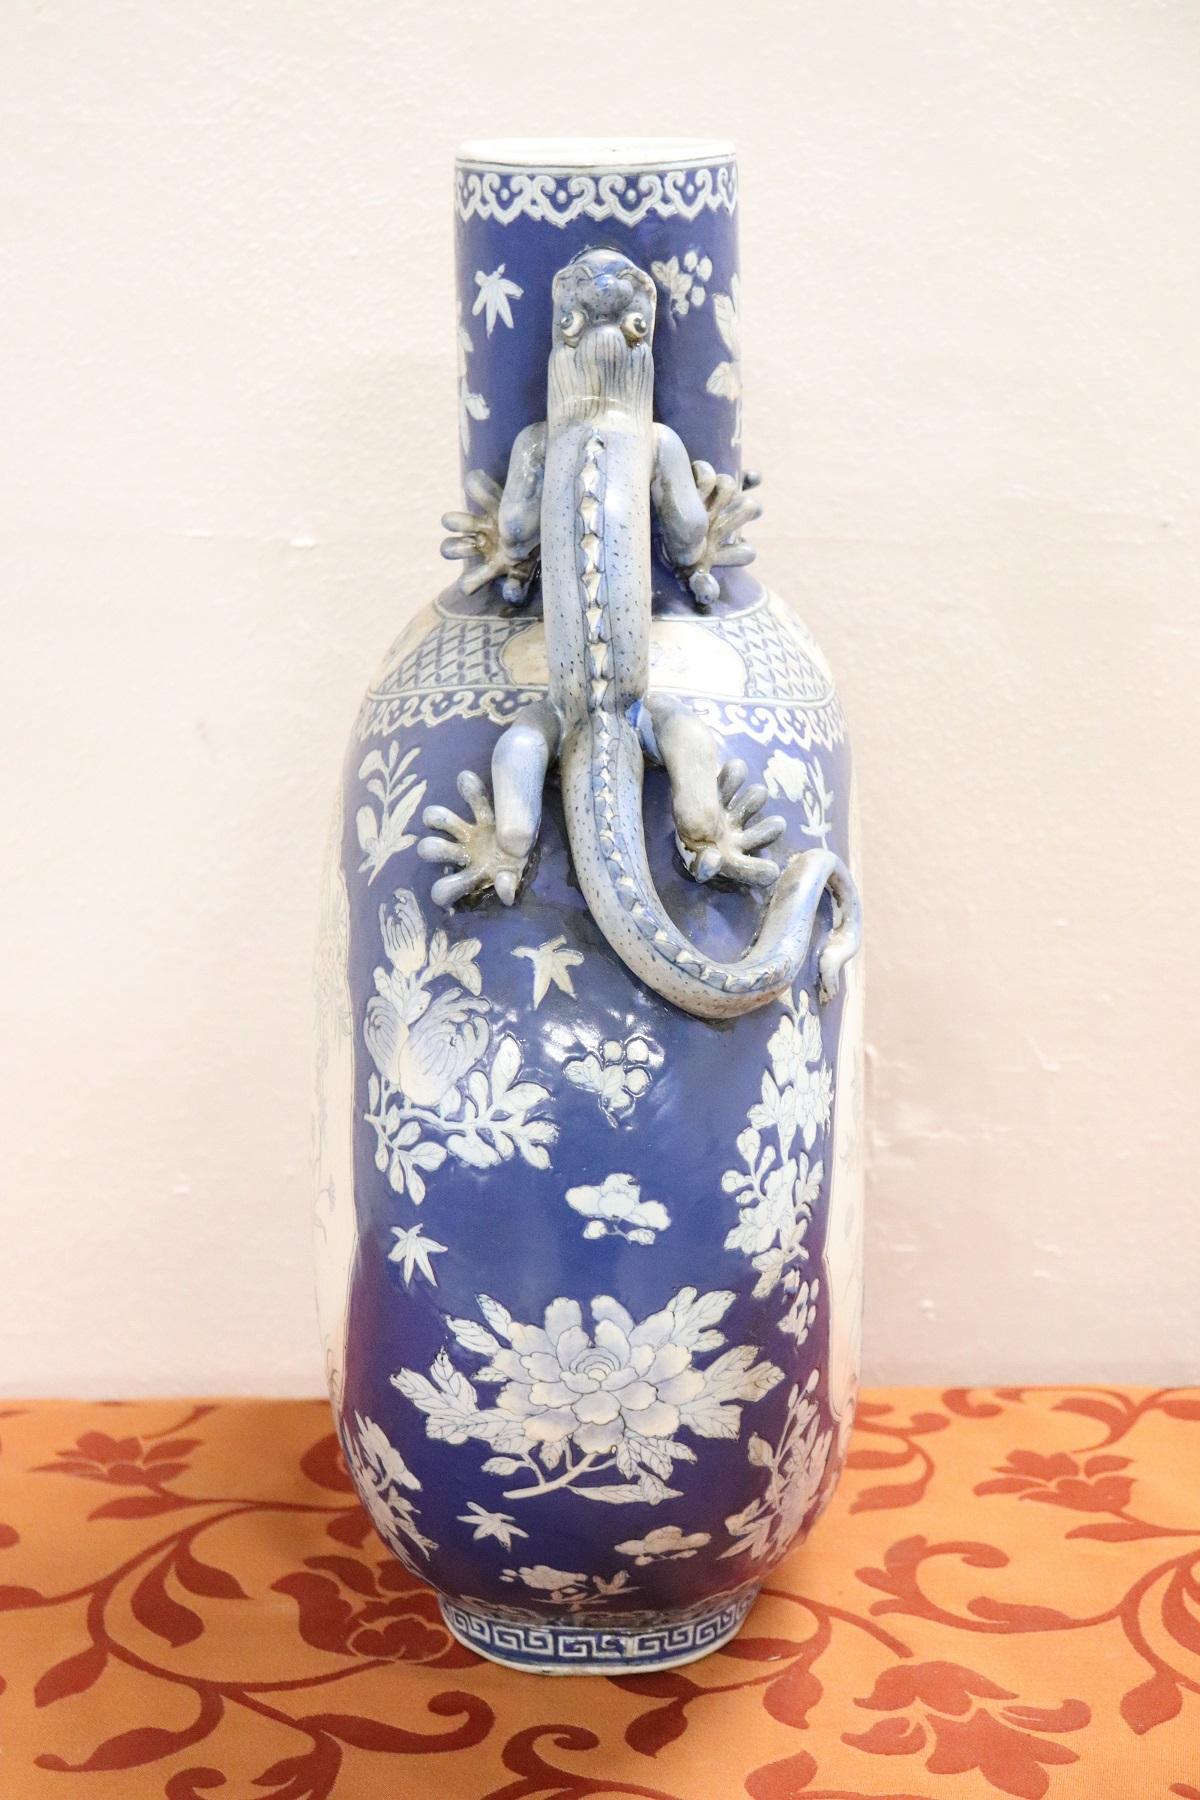 20th Century Chinese Hand Painted Vase in Ceramic blue and Floral Motifs (Keramik)